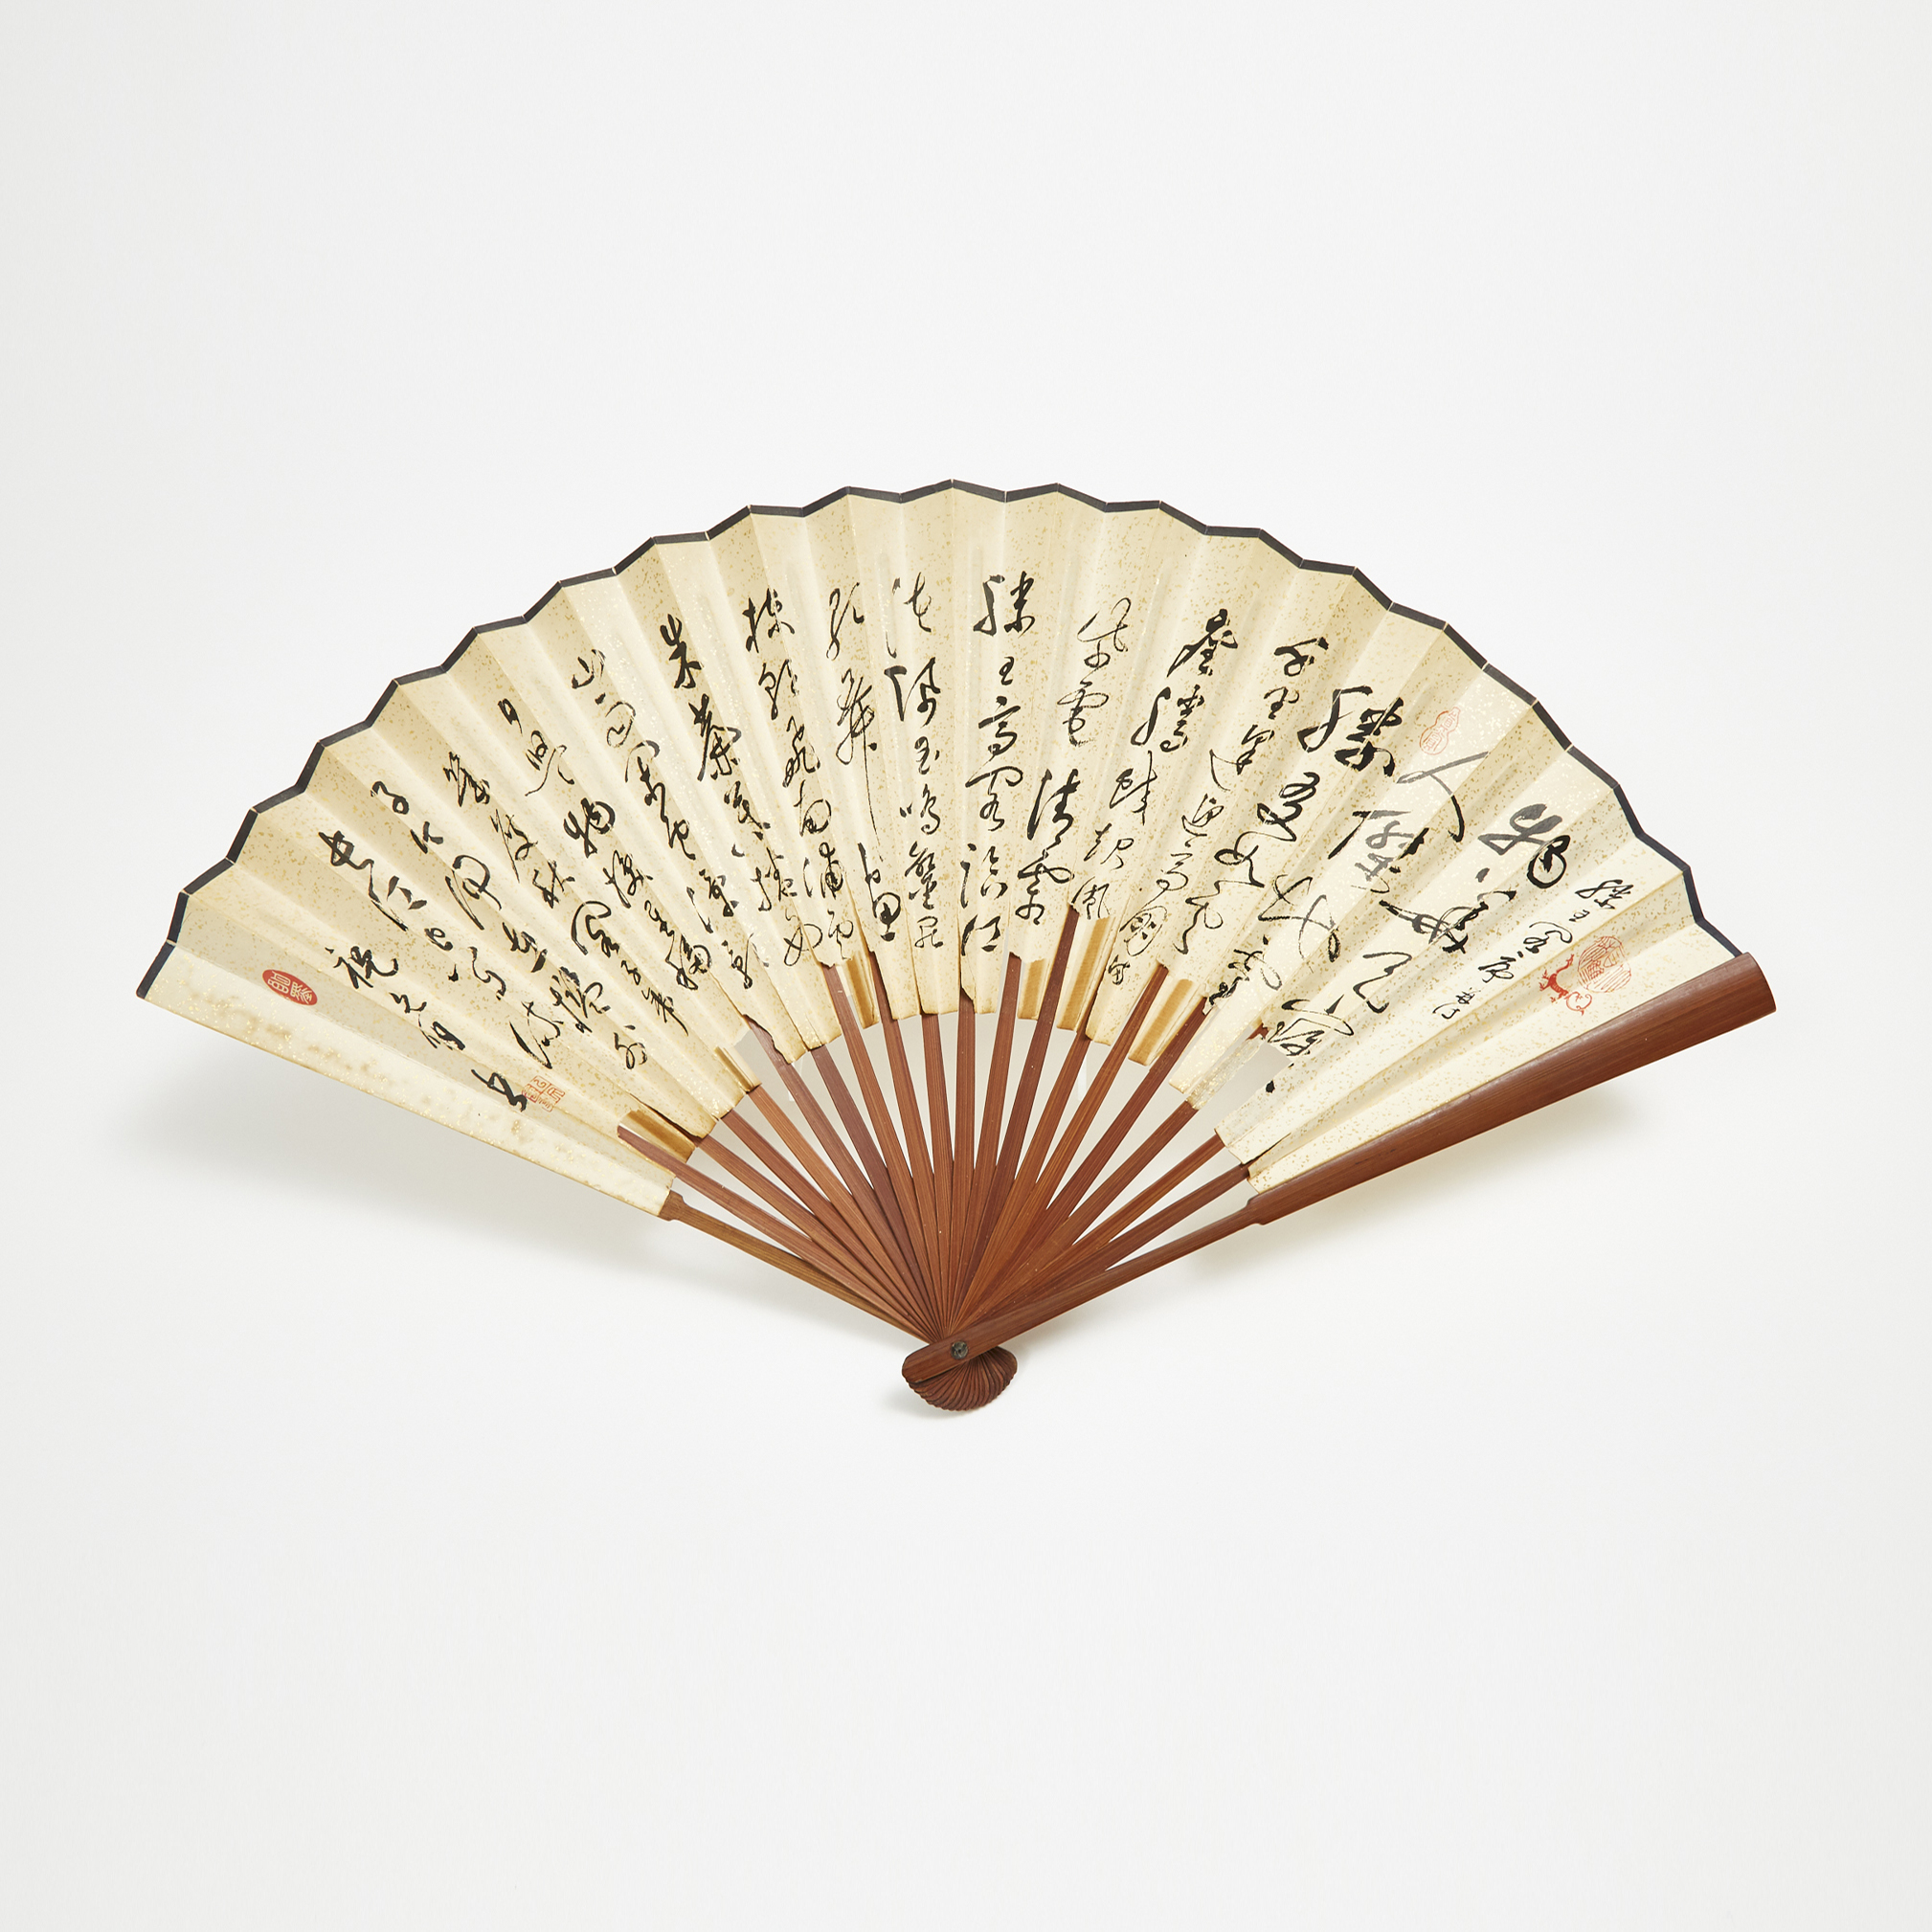 A Bamboo Folding Fan with Calligraphy